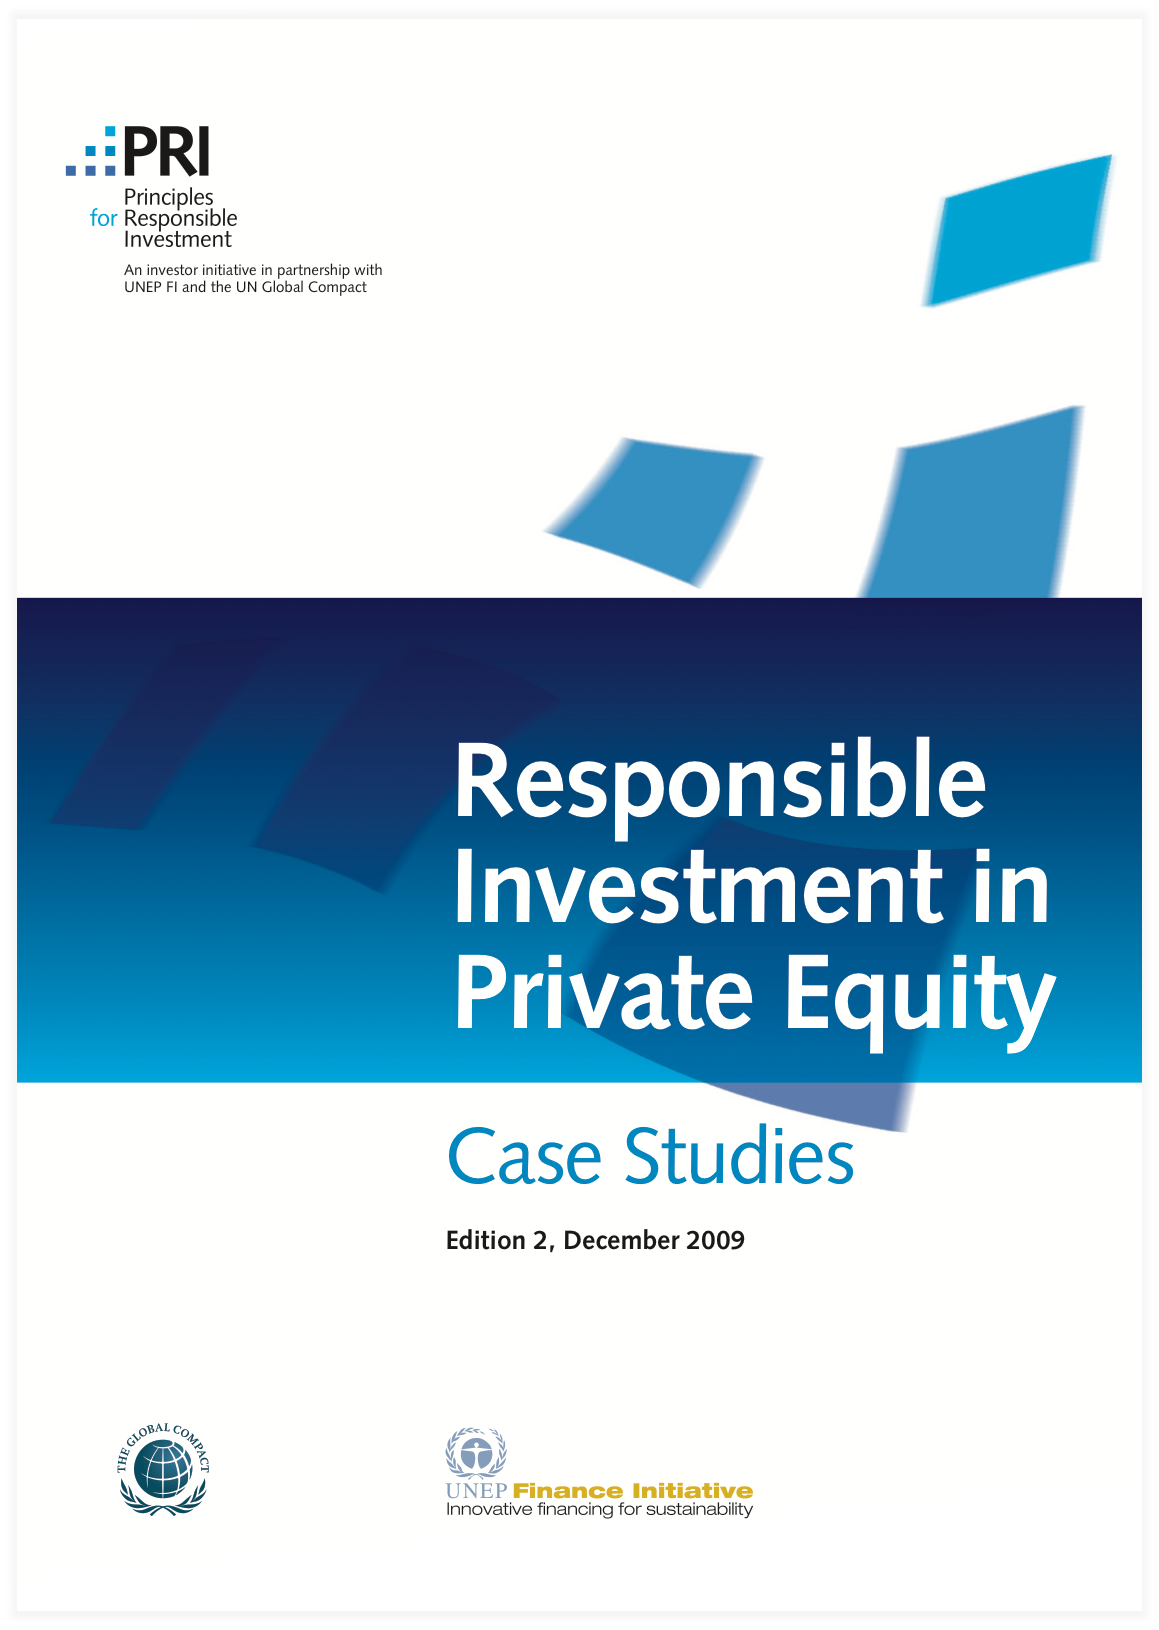 Responsible Investment in Private Equity: Case Studies